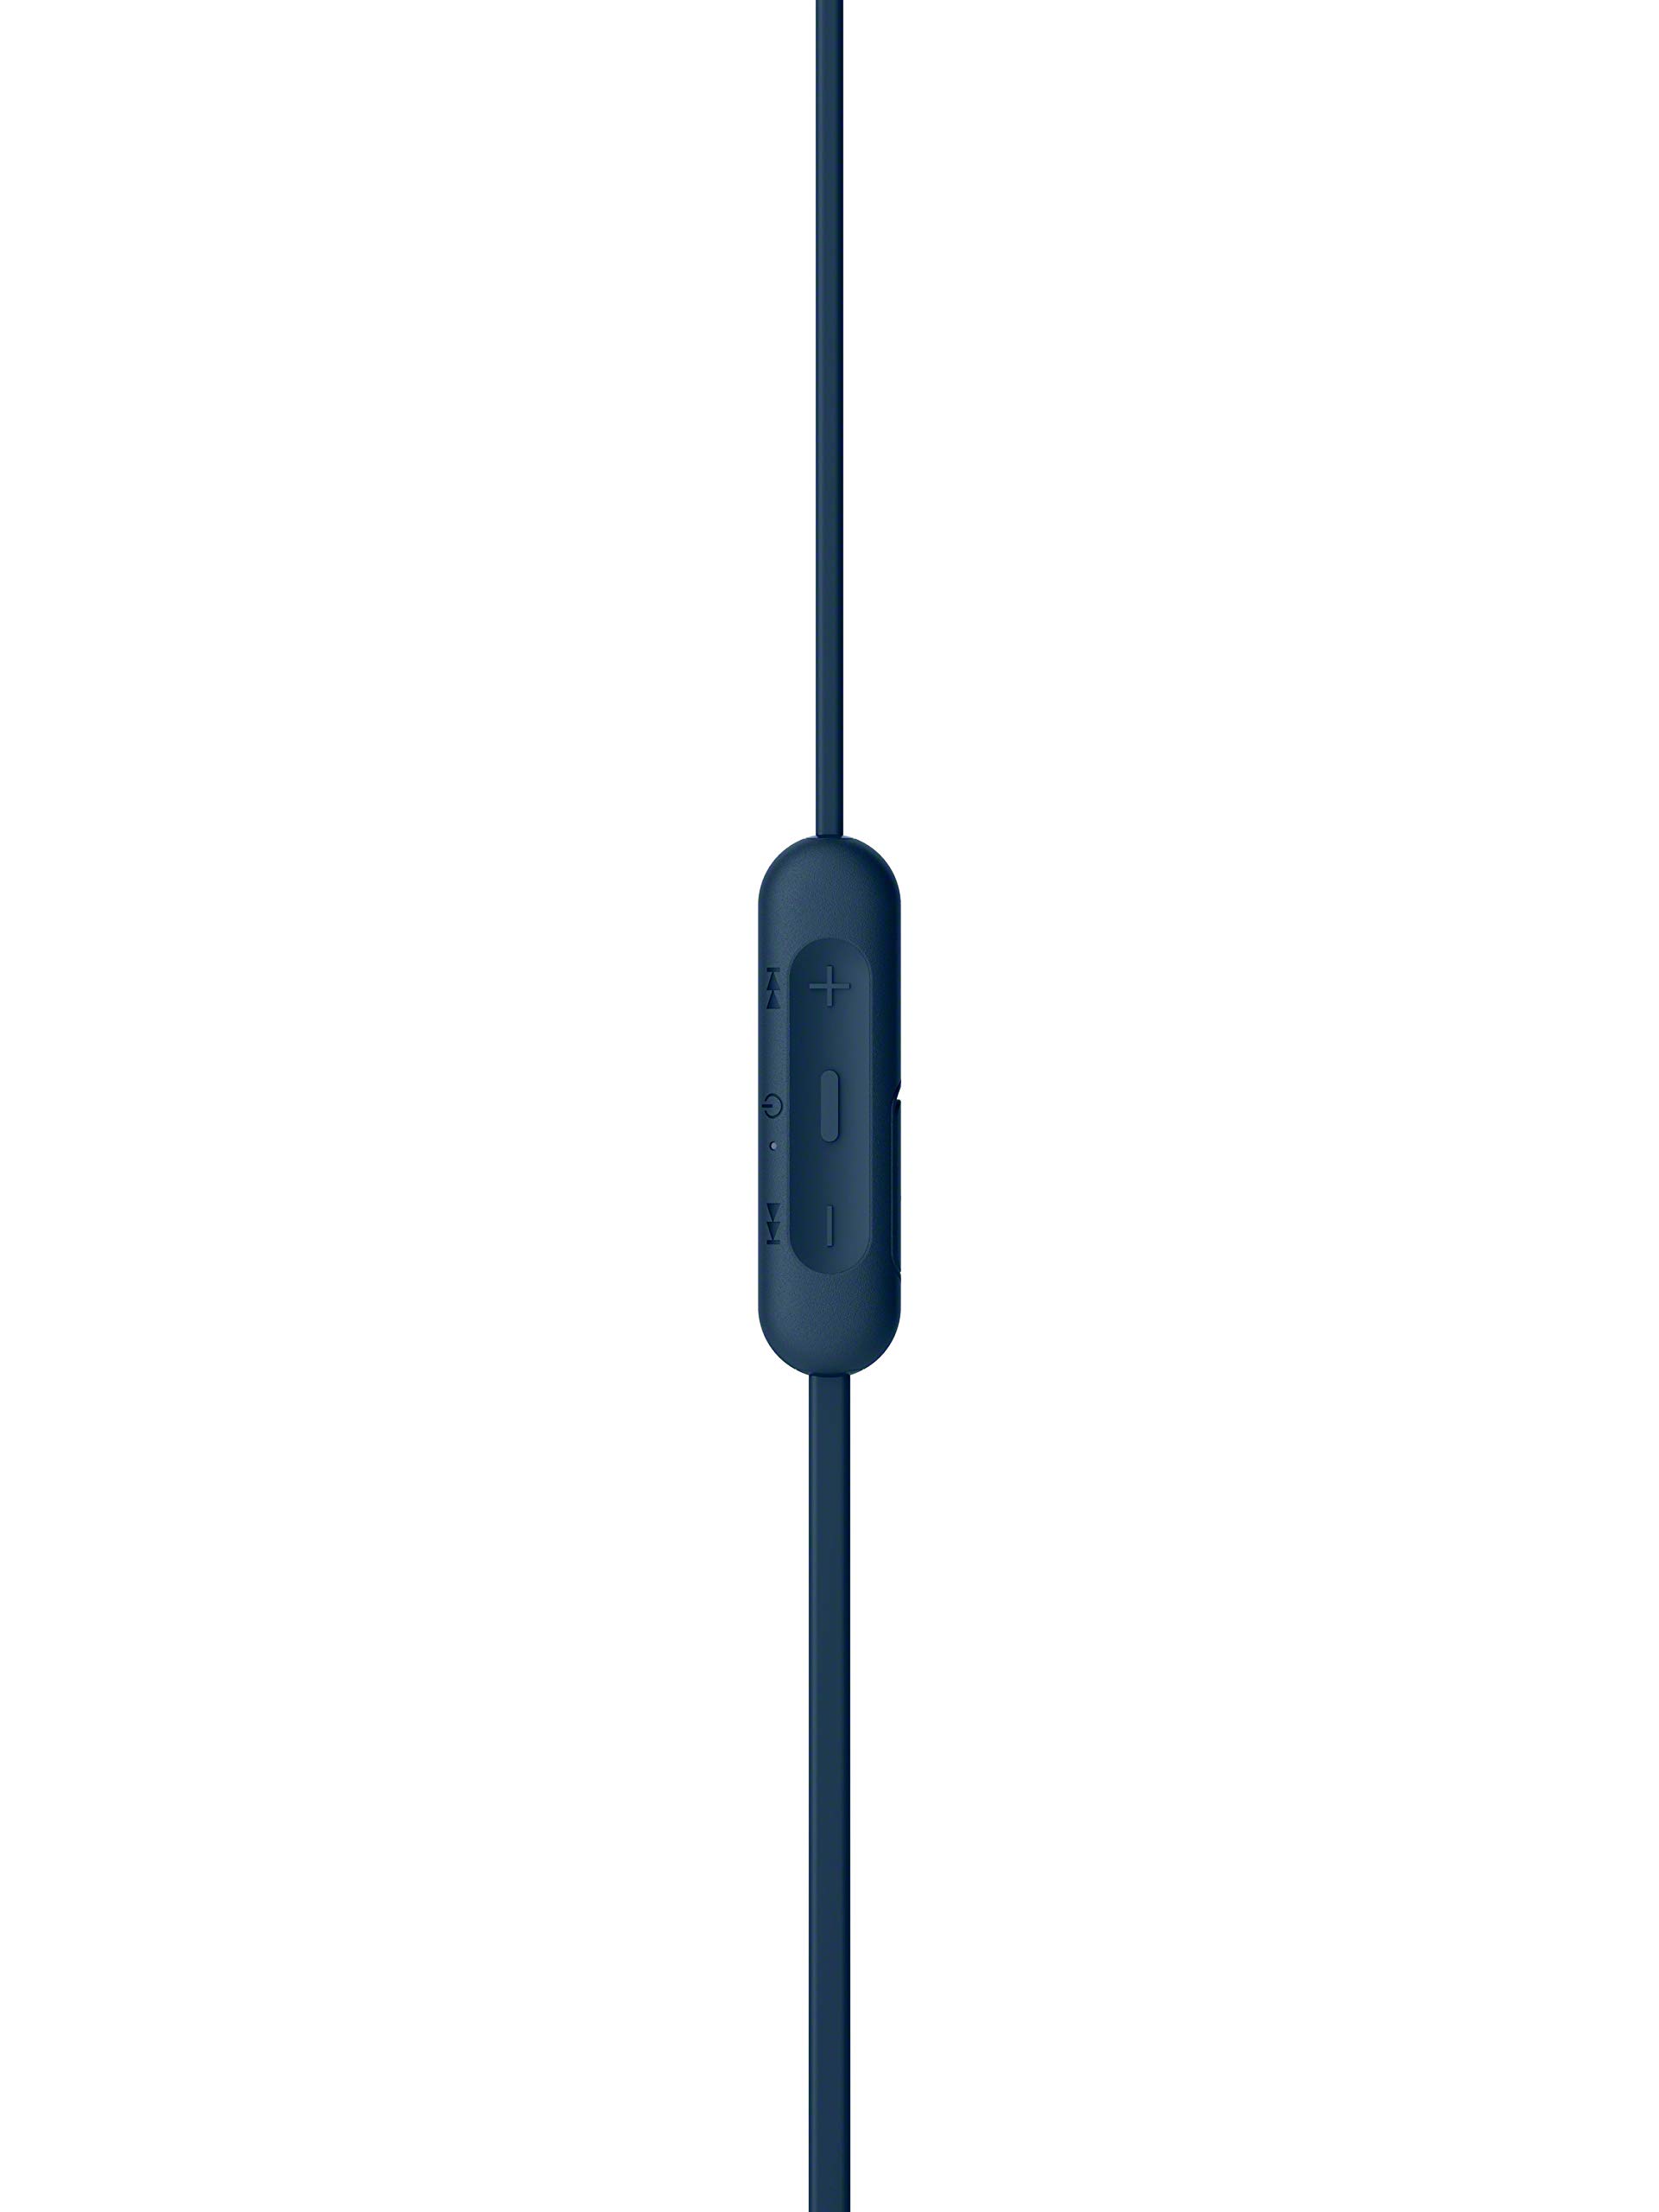 Sony WI-XB400 Wireless in-Ear Extra Bass Headset/Headphones with mic for Phone Call, Blue (WIXB400/L)